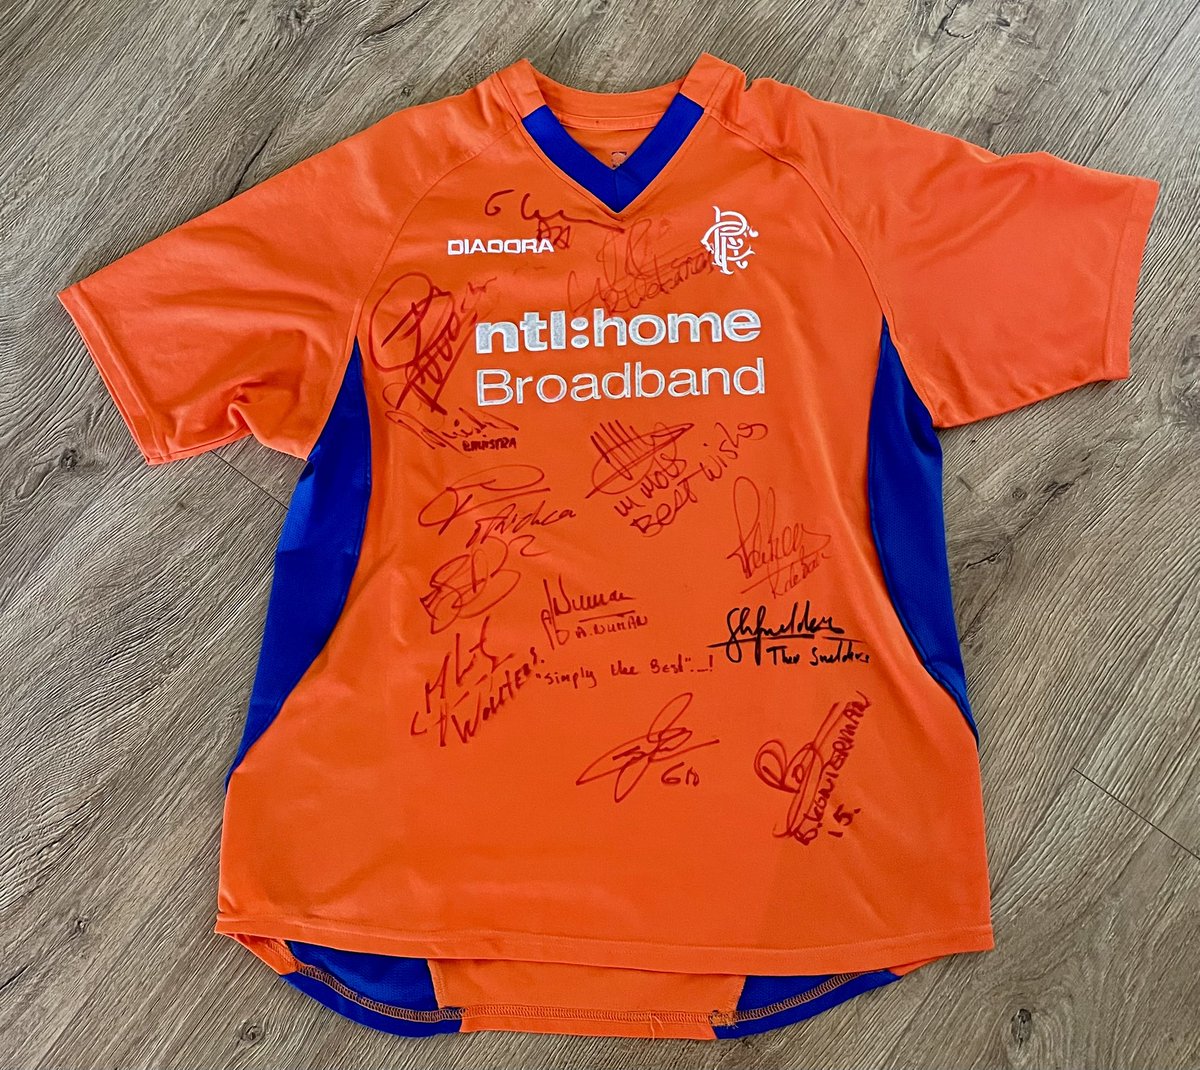 Earlier today I shook Peter van Vossen’s hand and he completed this #projectorange top. Signed now by all Dutch players ever to play for Rangers + Dick Advocaat. Roll on Sam Lammers 😉!